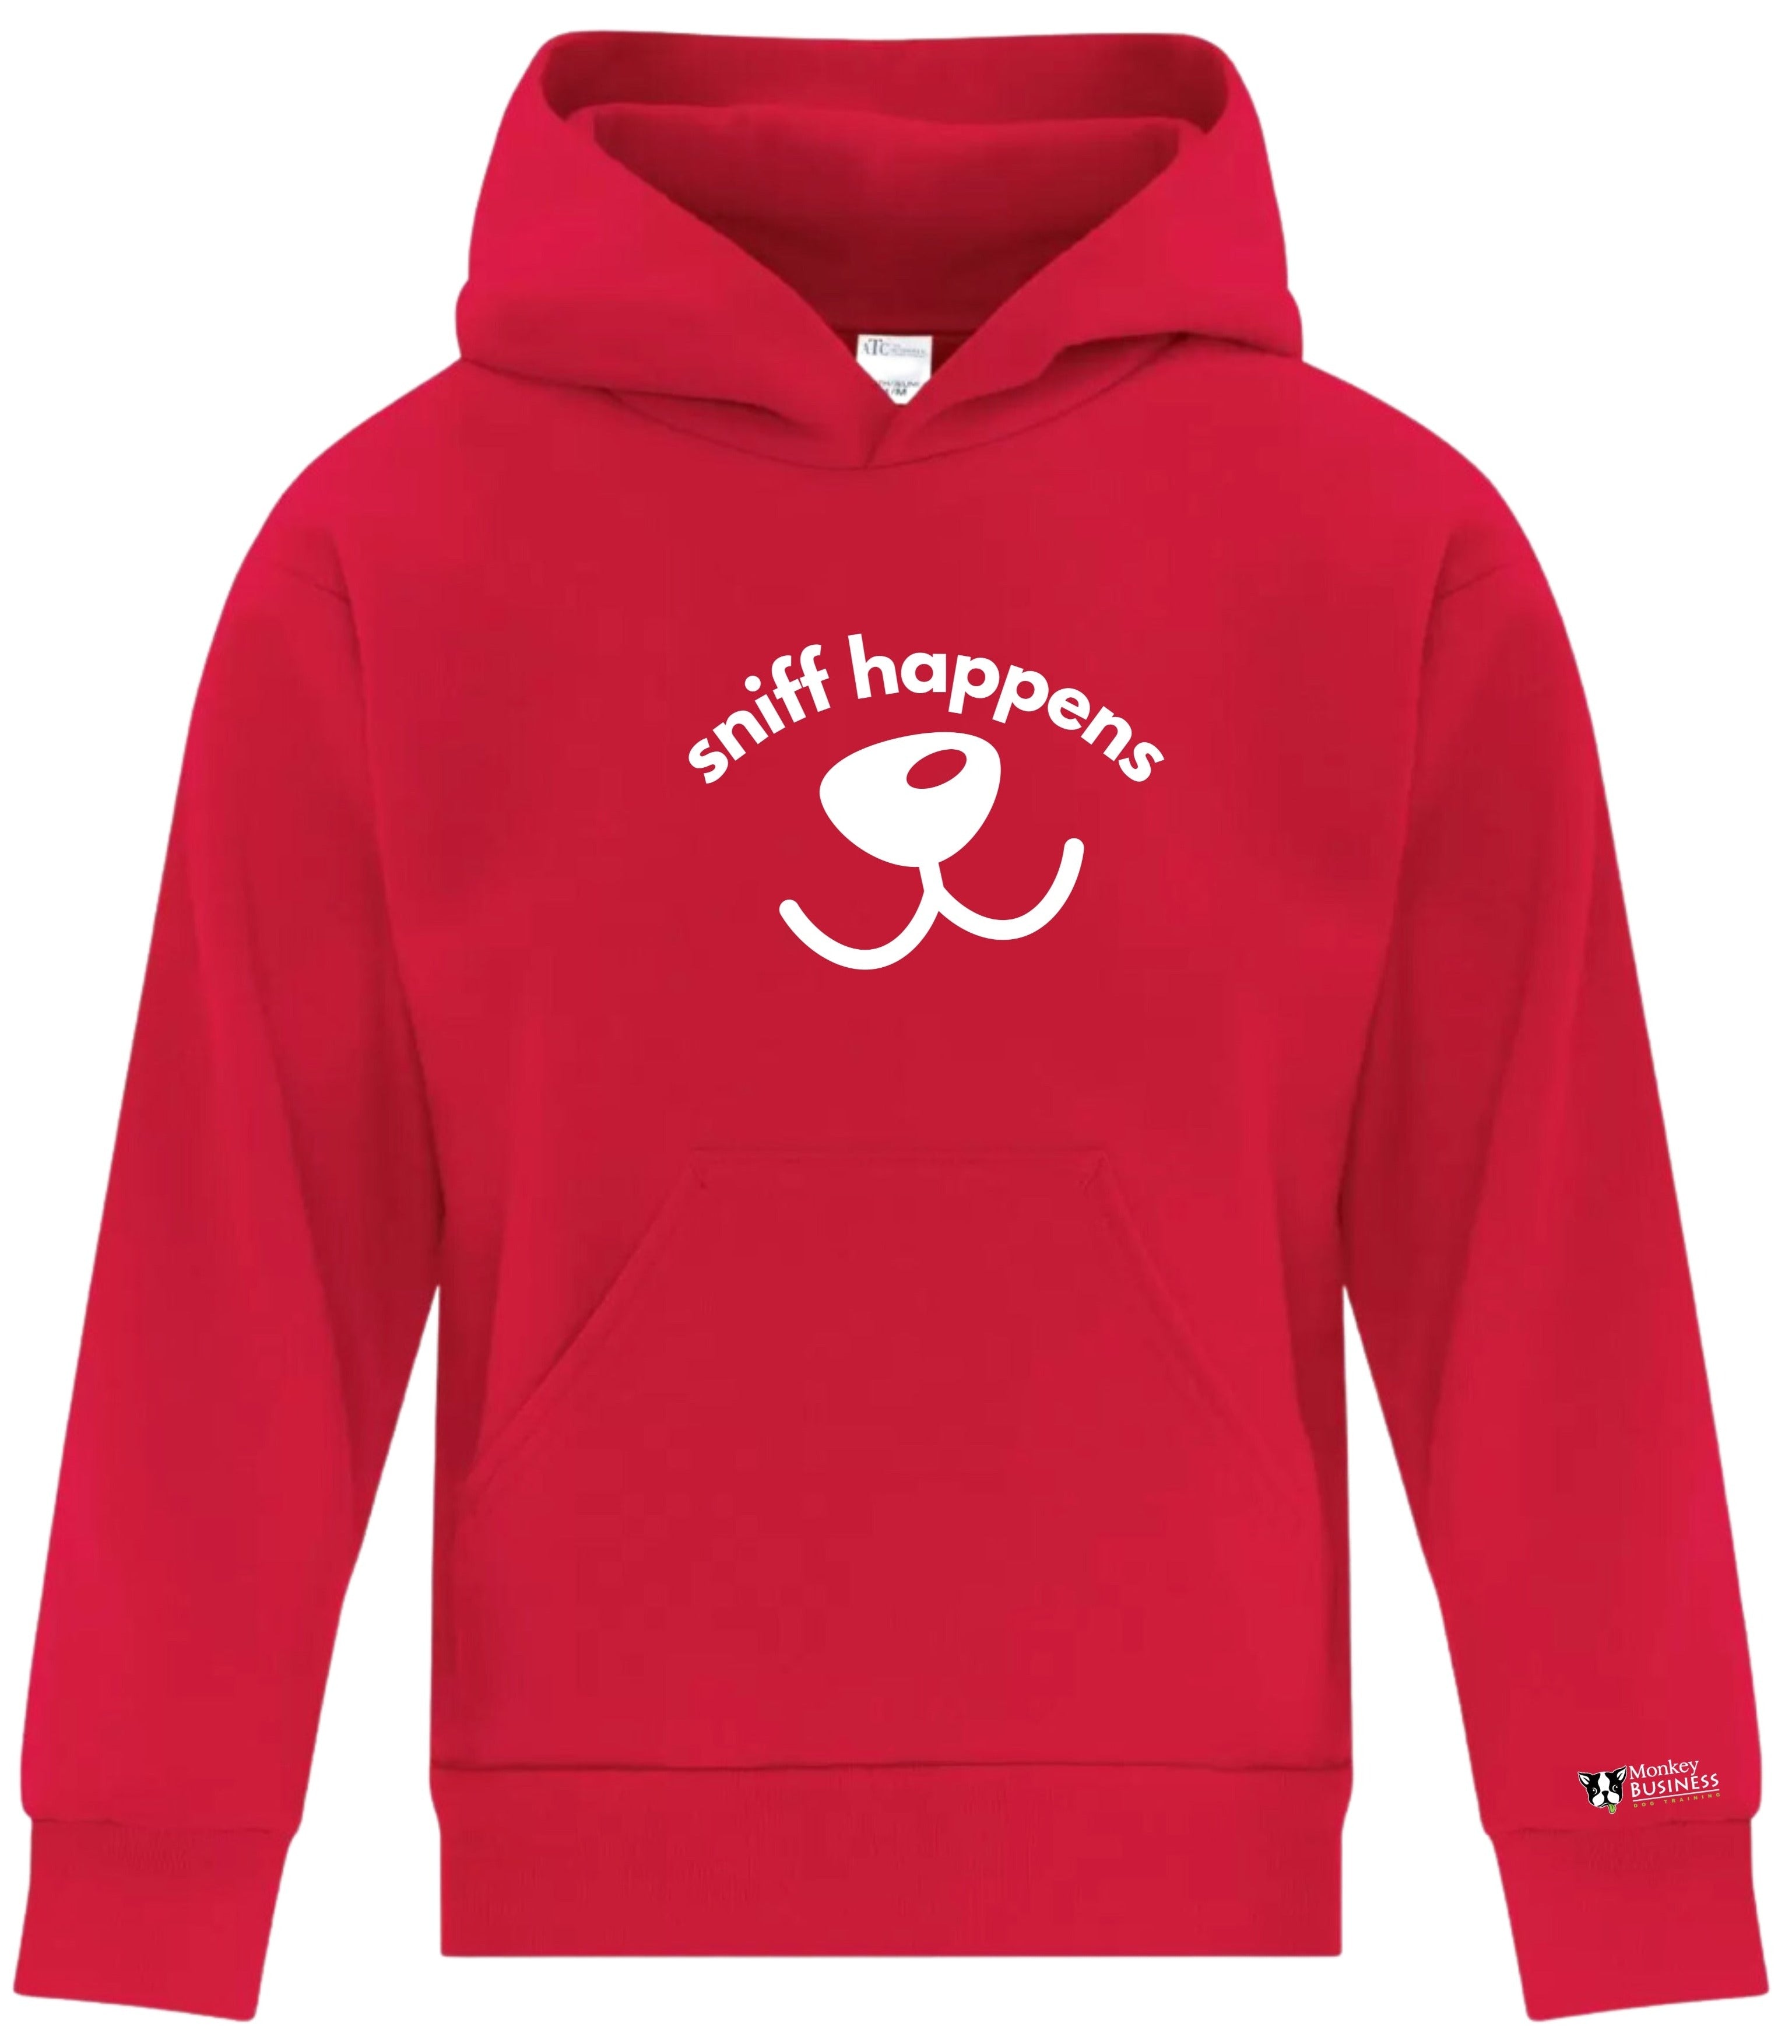 MB Youth Hoodie- Sniff Happens